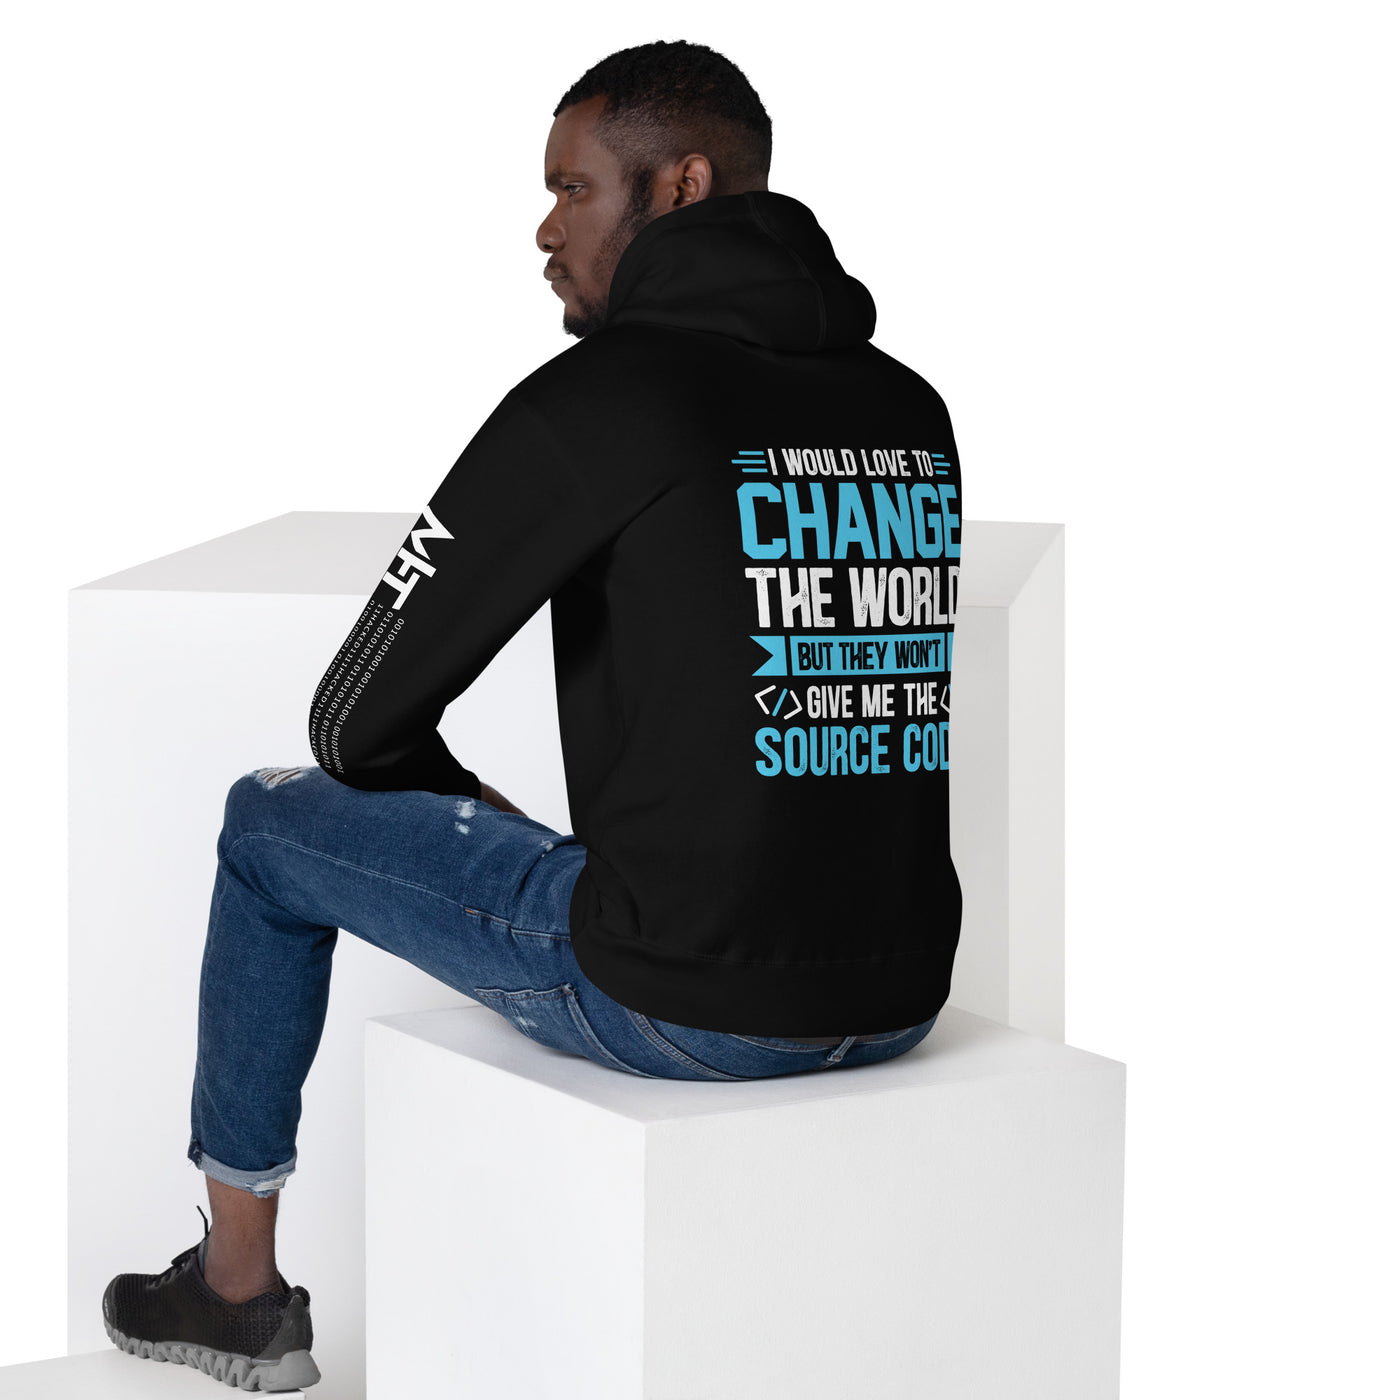 I would Love to Change the world, but they won't Give me the Source Code V1 - Unisex Hoodie ( Back Print )